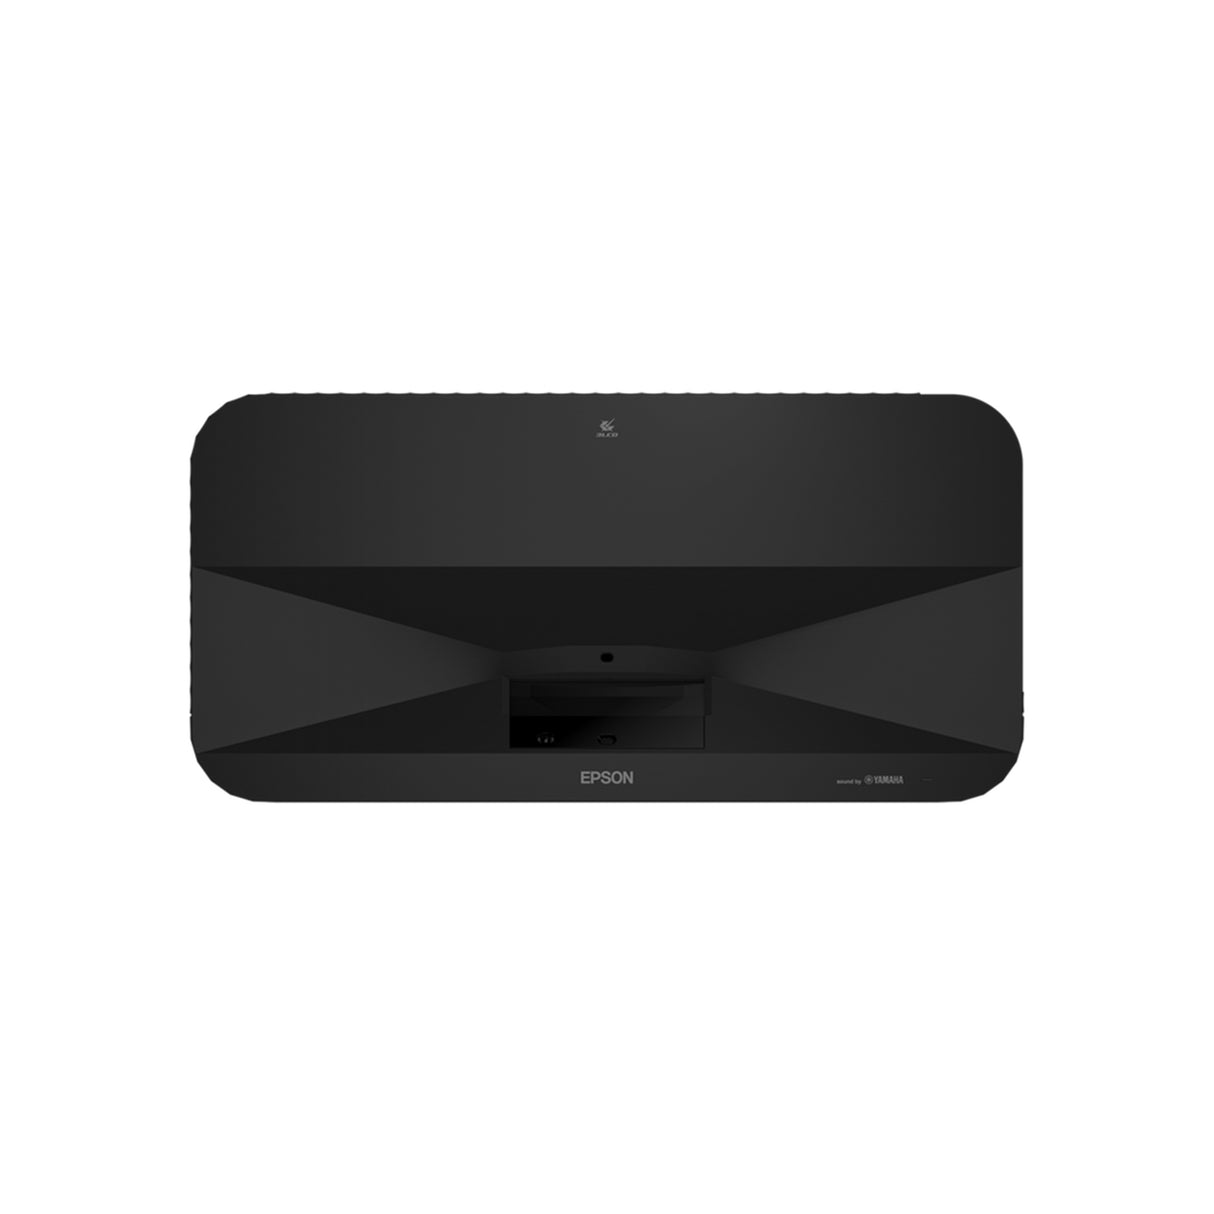 Epson EH-LS800B - Super Ultra Short Throw Android Smart TV Laser Projector